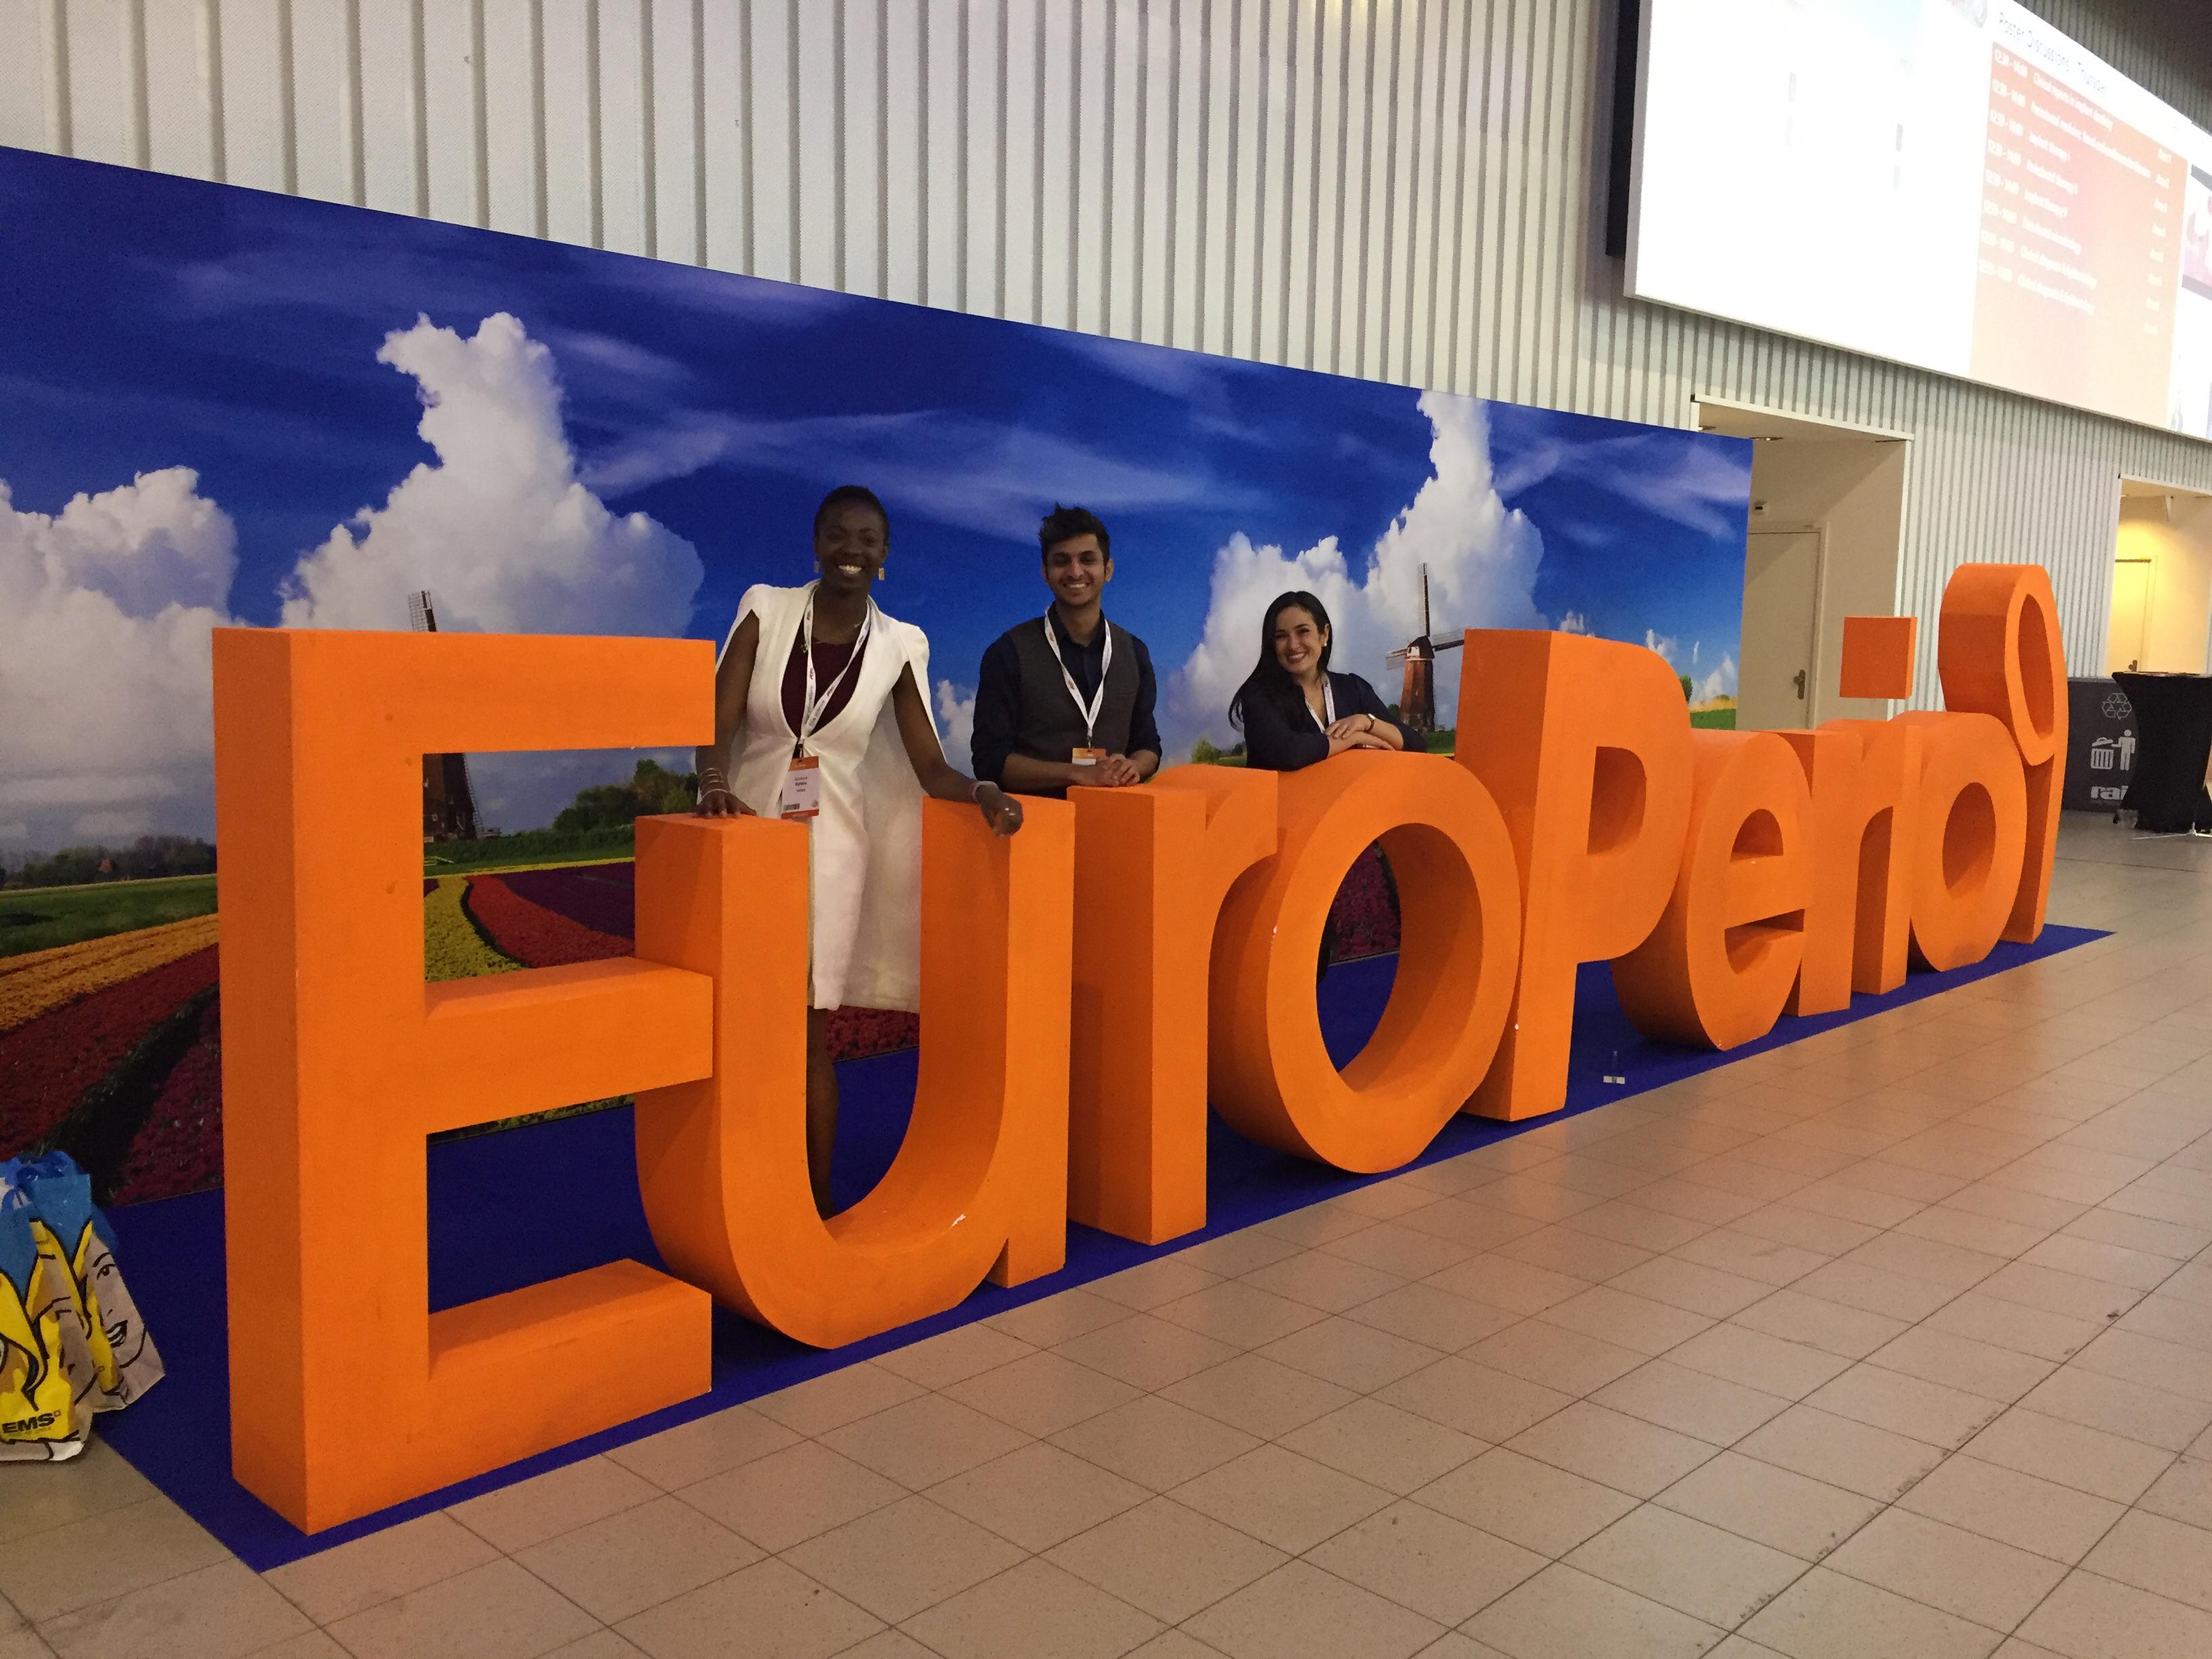 group shot in front of the europerio9 sign